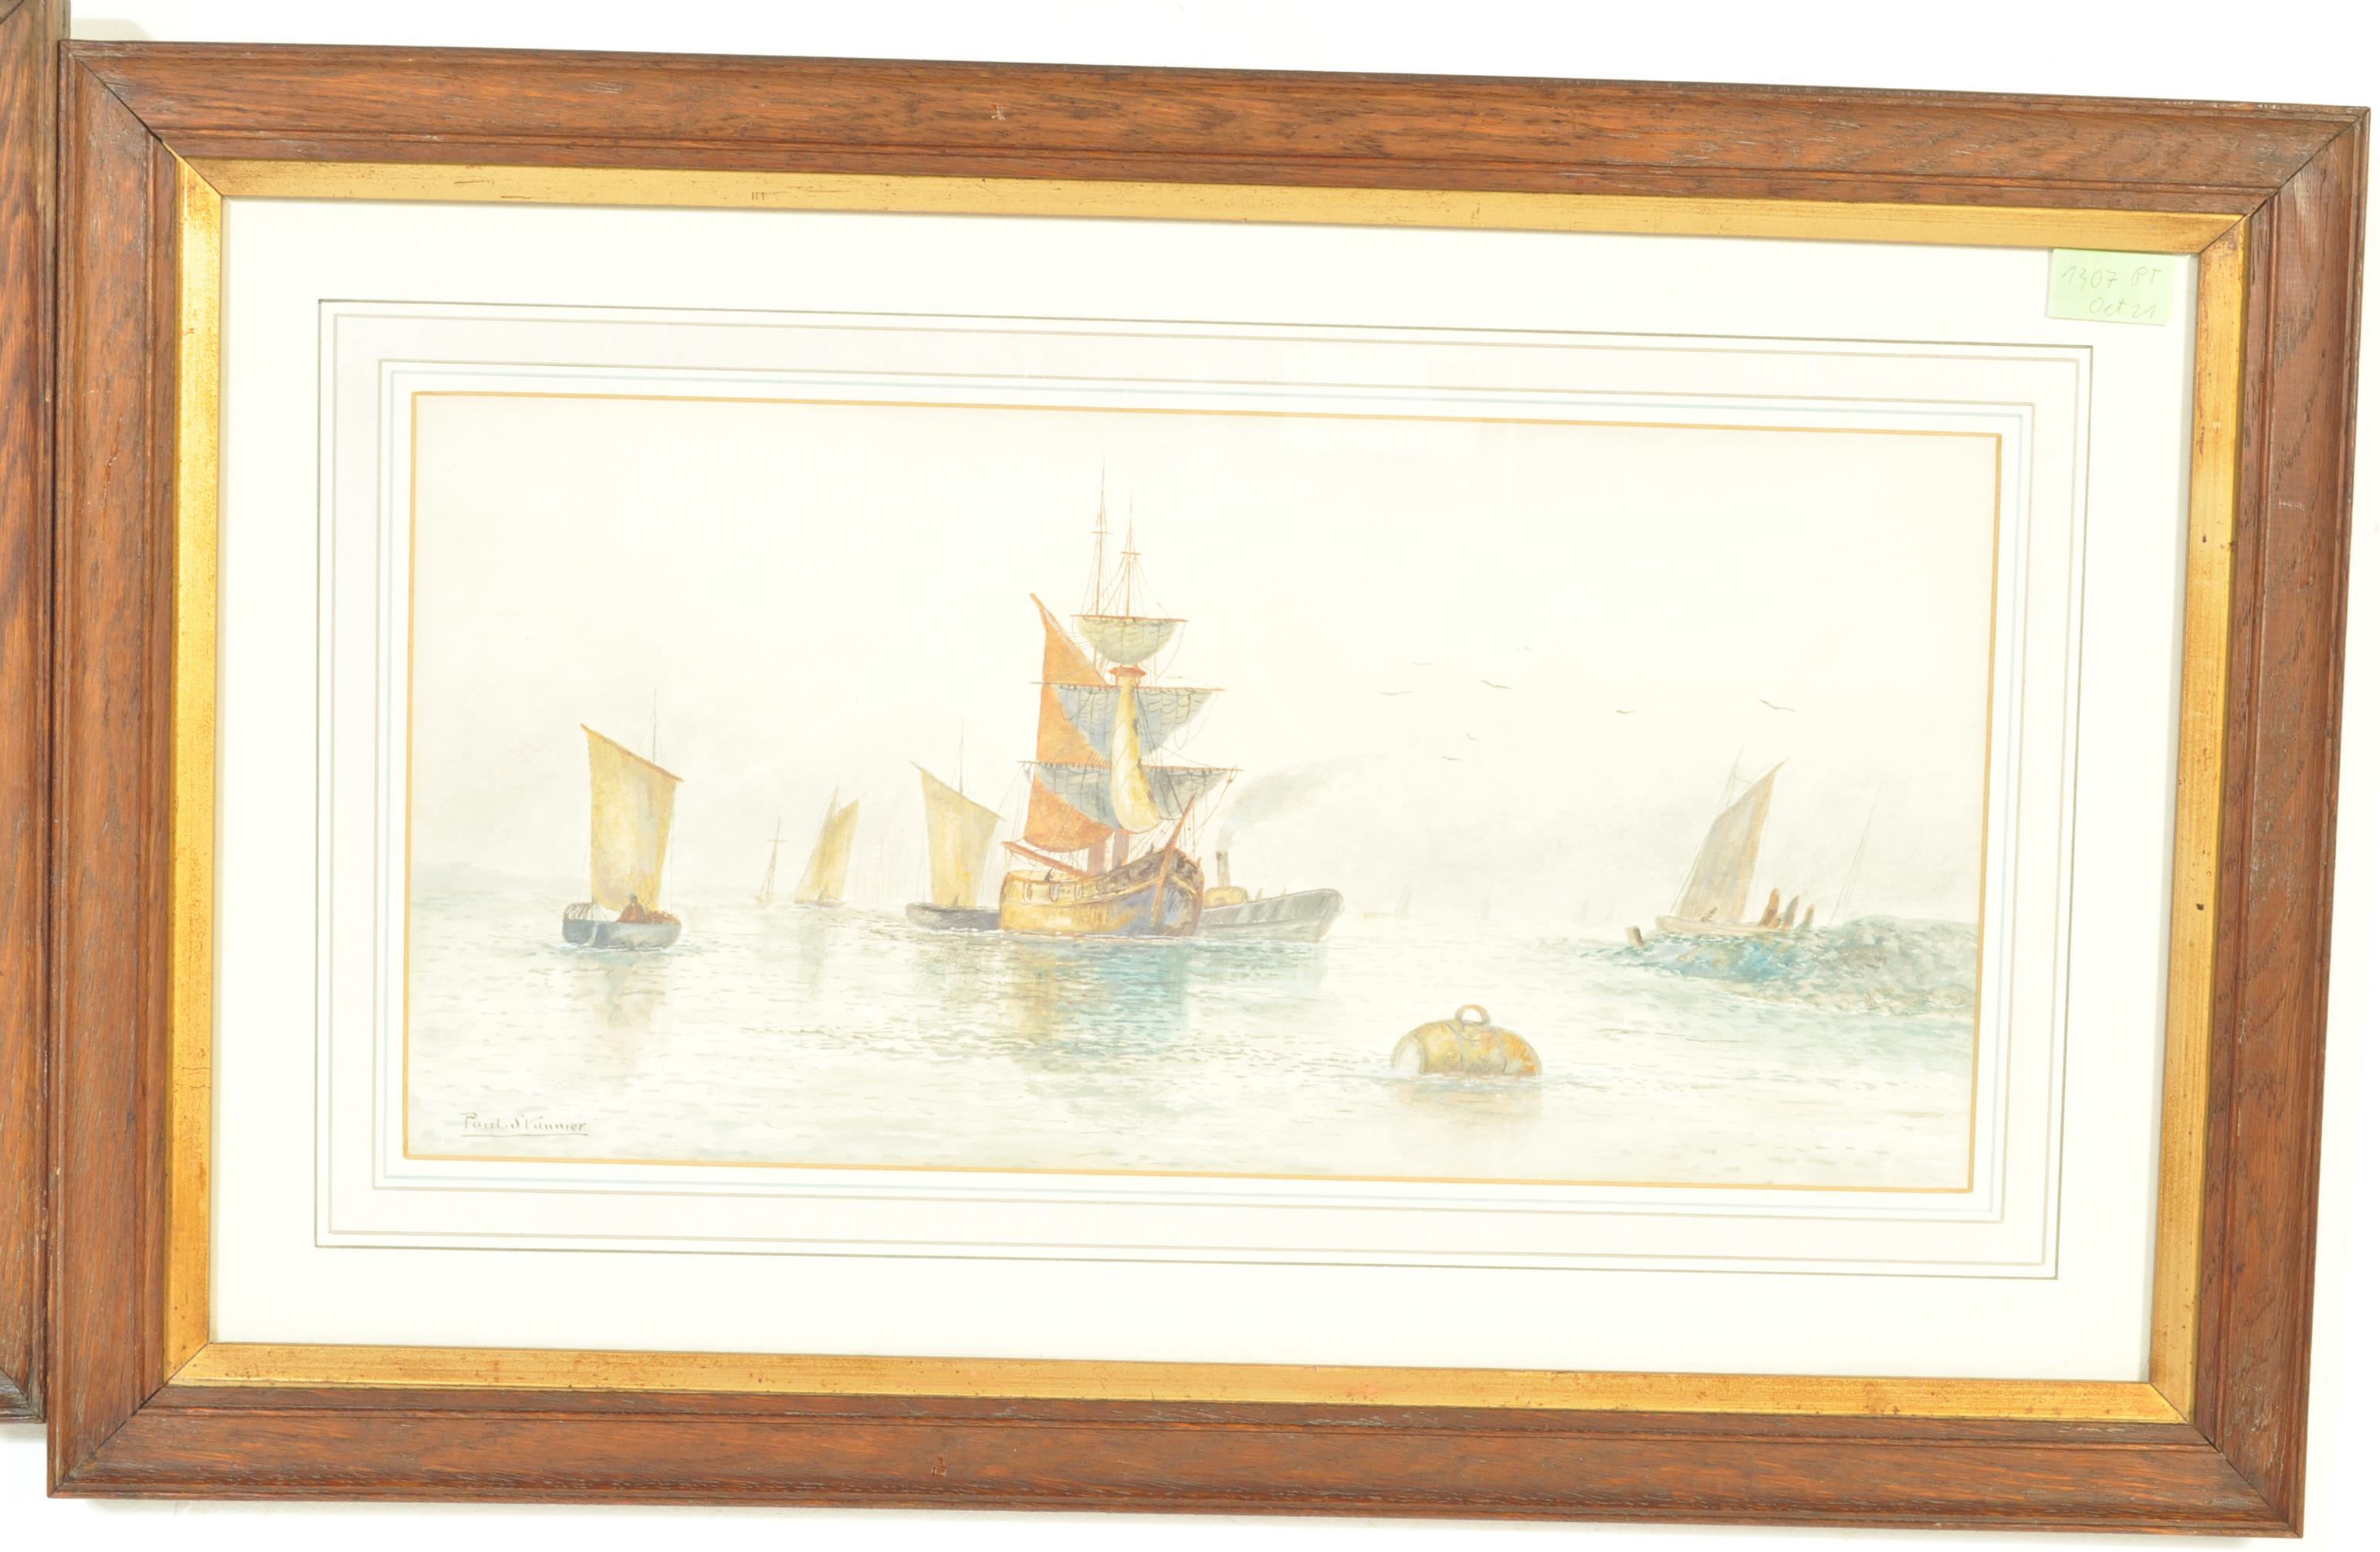 TWO EARLY 20TH CENTURY SEASCAPE VIEWS PAINTINGS BY PAUL STANNIER - Image 3 of 7